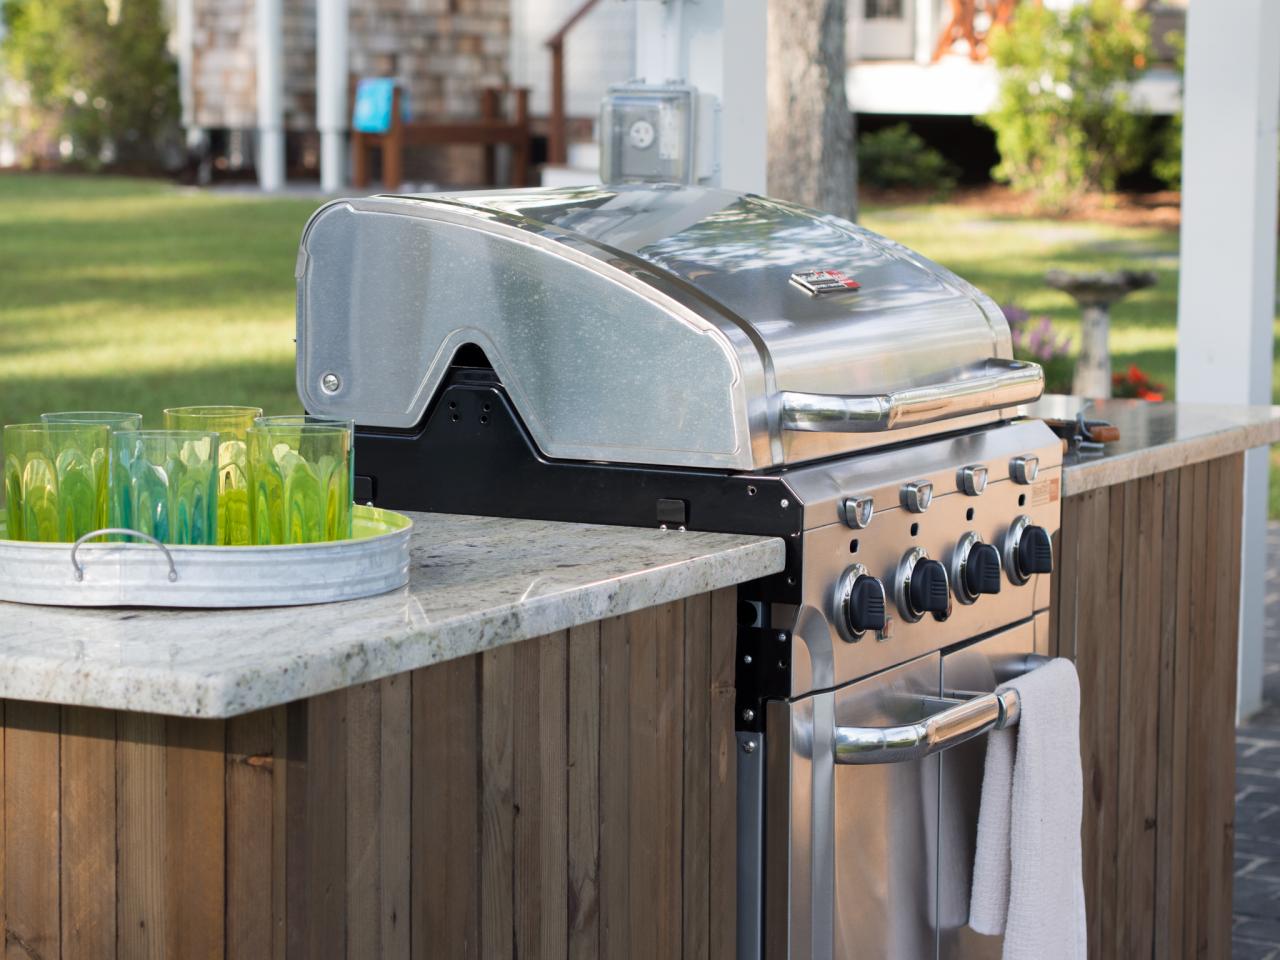 how to build a grilling island | how-tos | diy